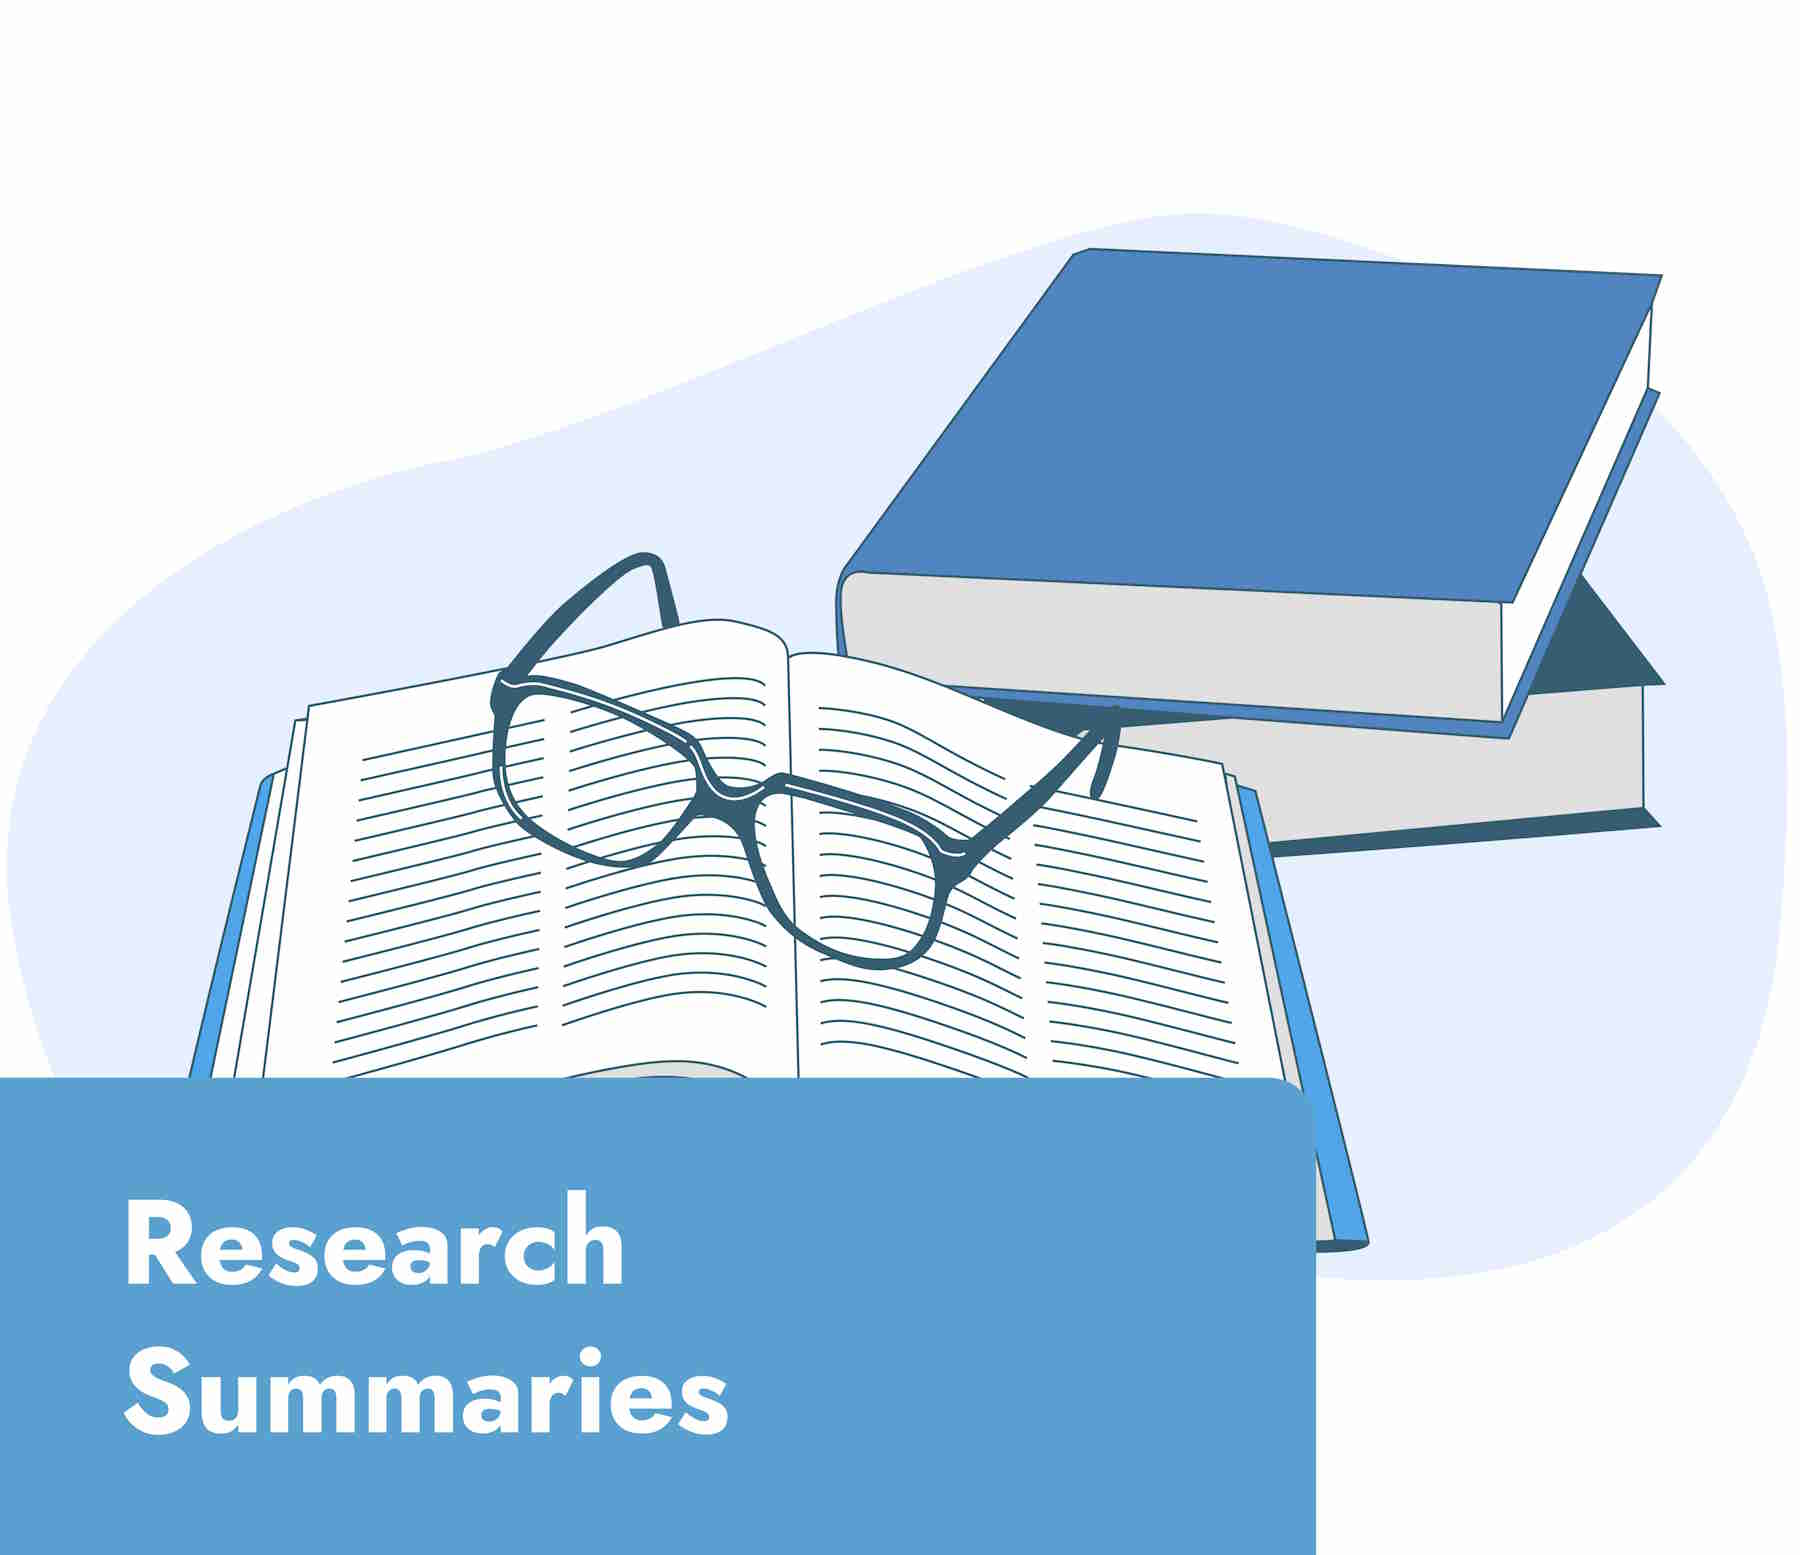 Research summaries for reported outcomes from 1Unit partner hospitals and SIBR units.